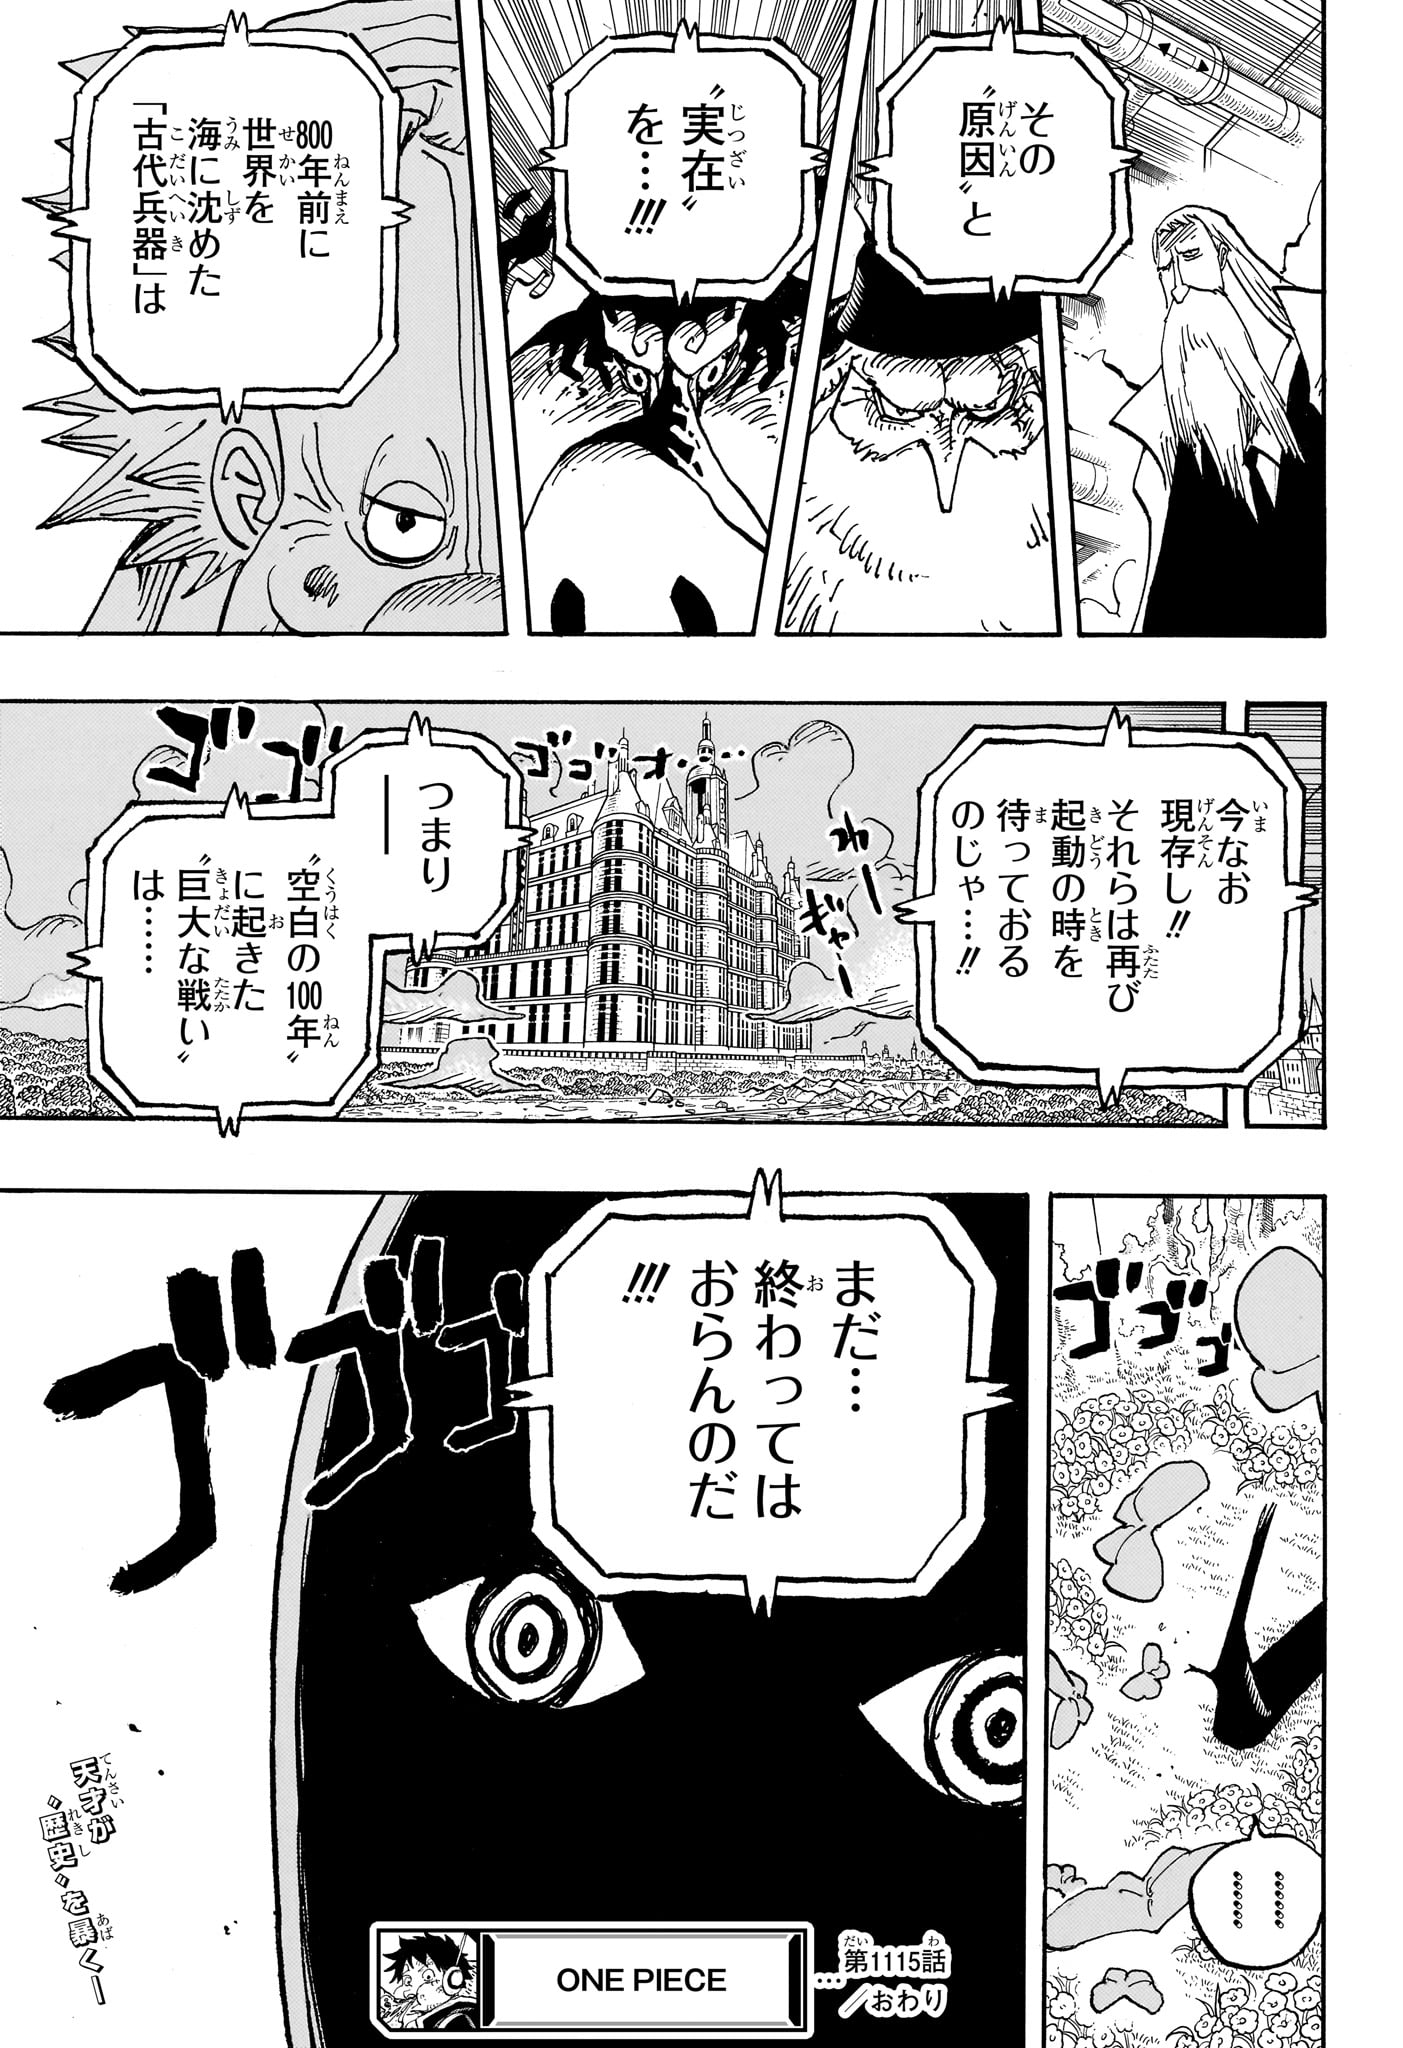 One Piece - Chapter 1115 - Page 17